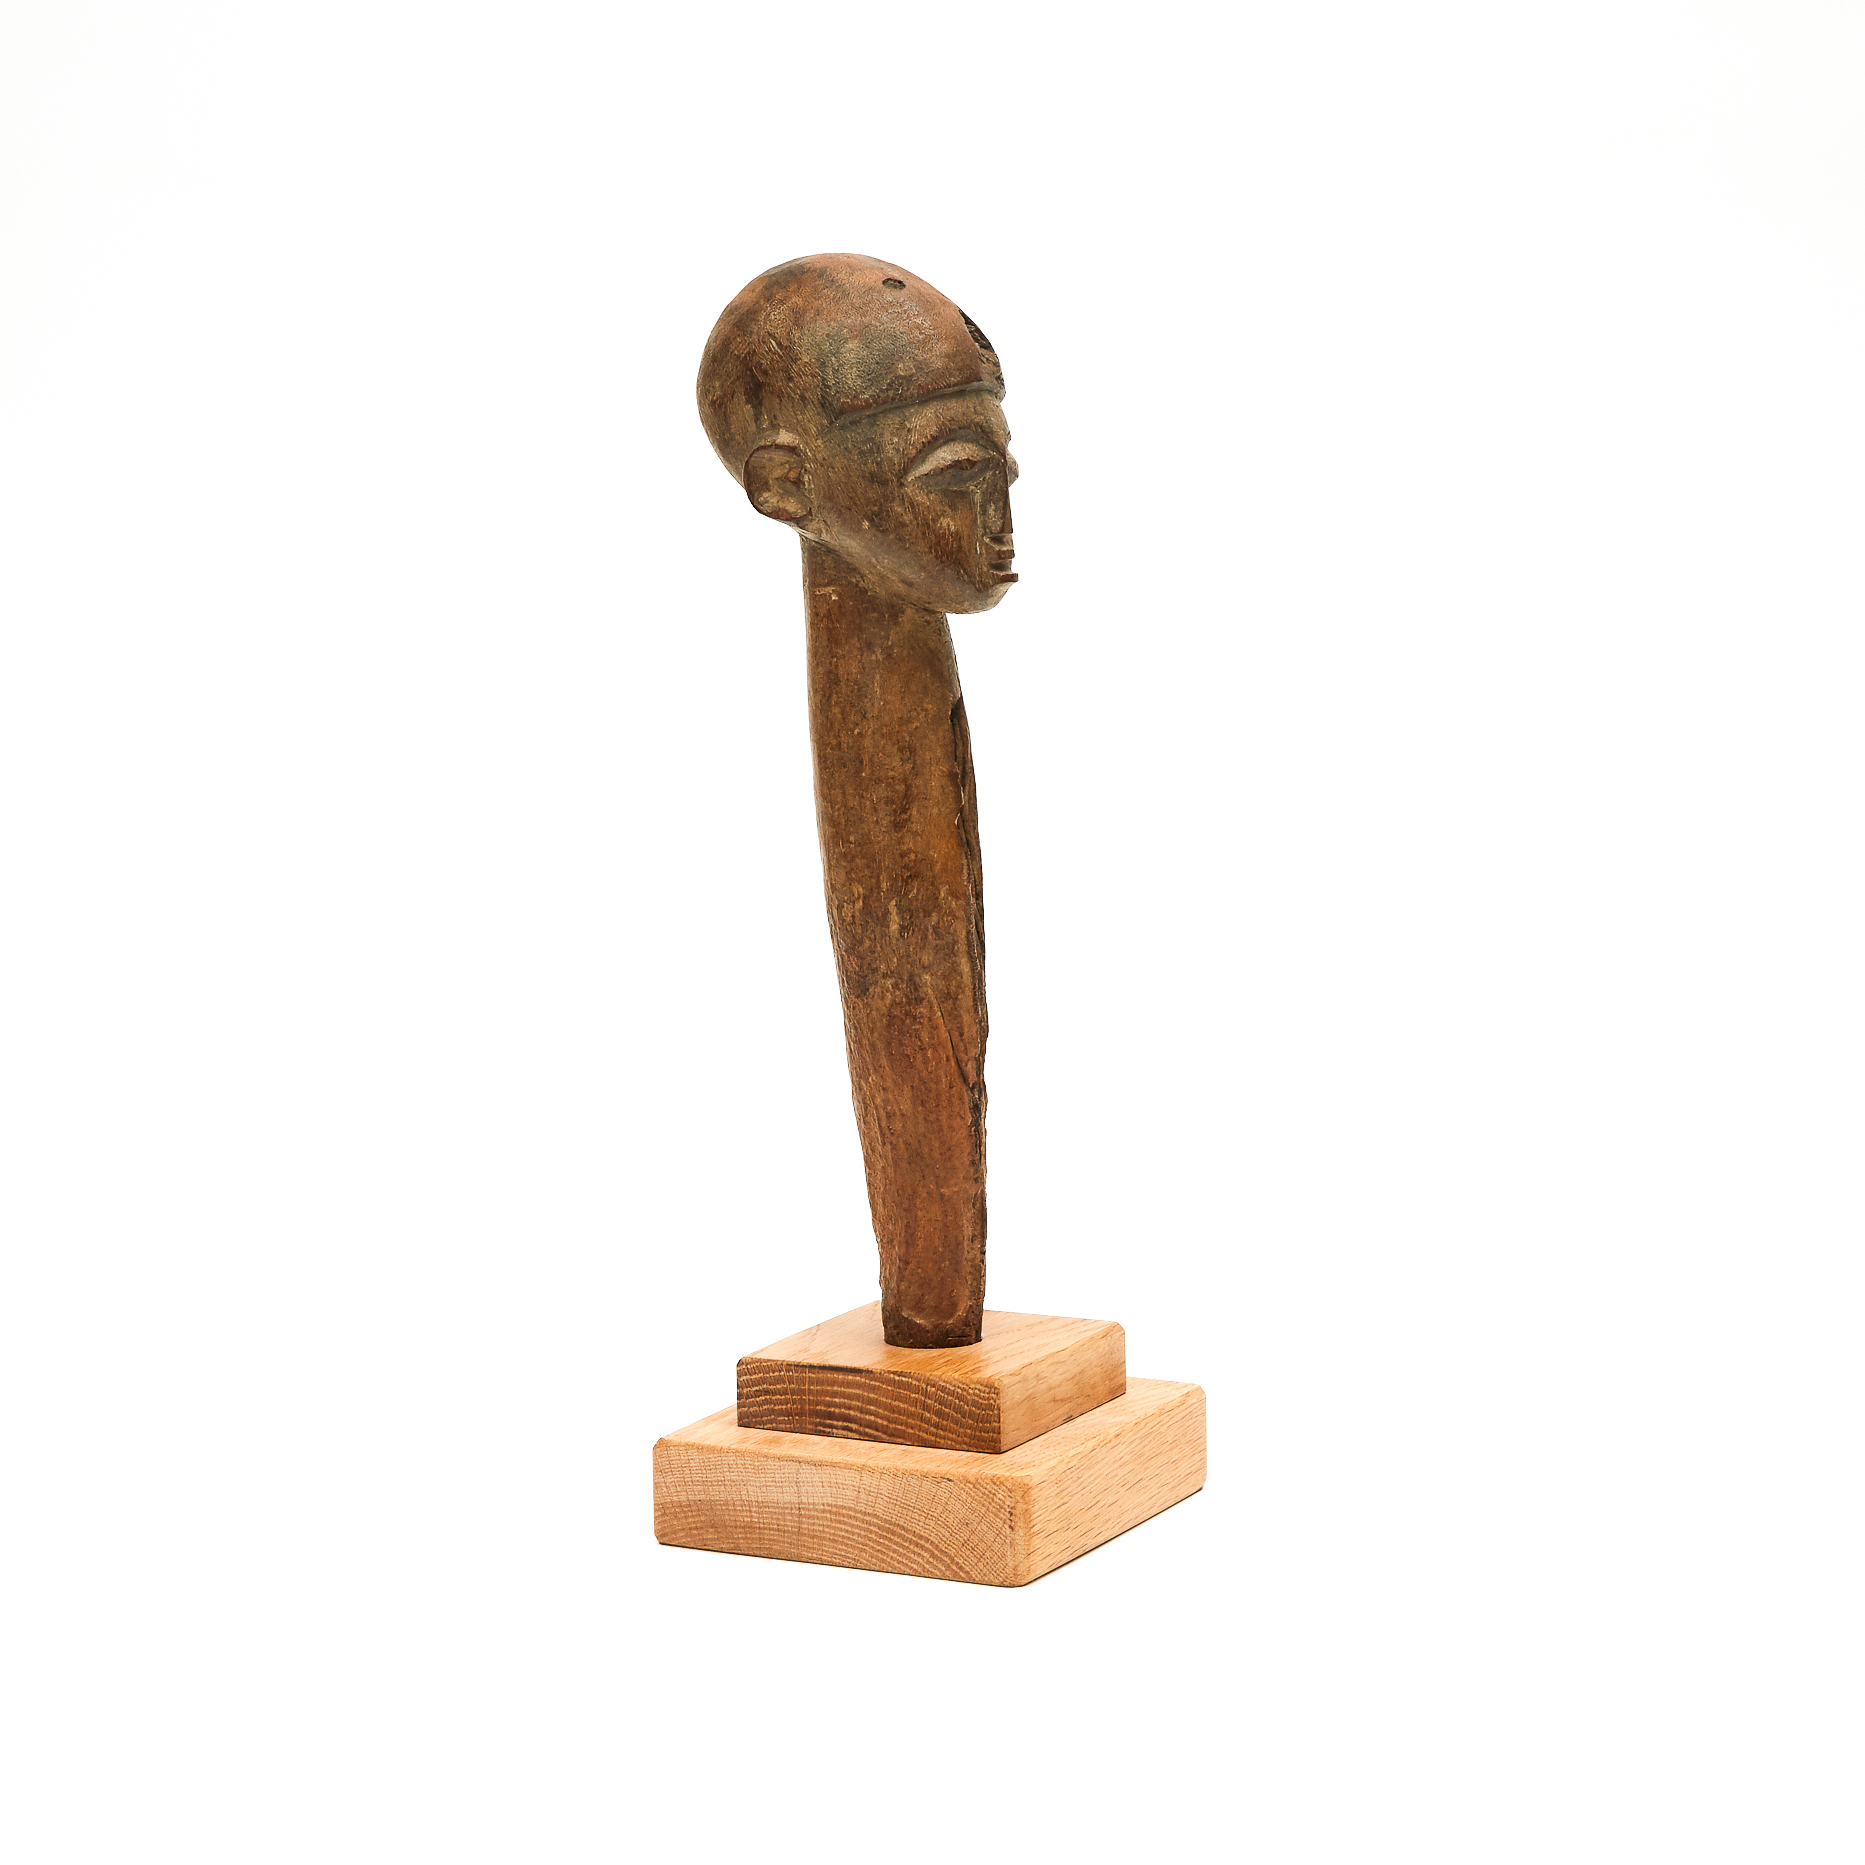 Lobi Head, early to mid 20th century, West Africa